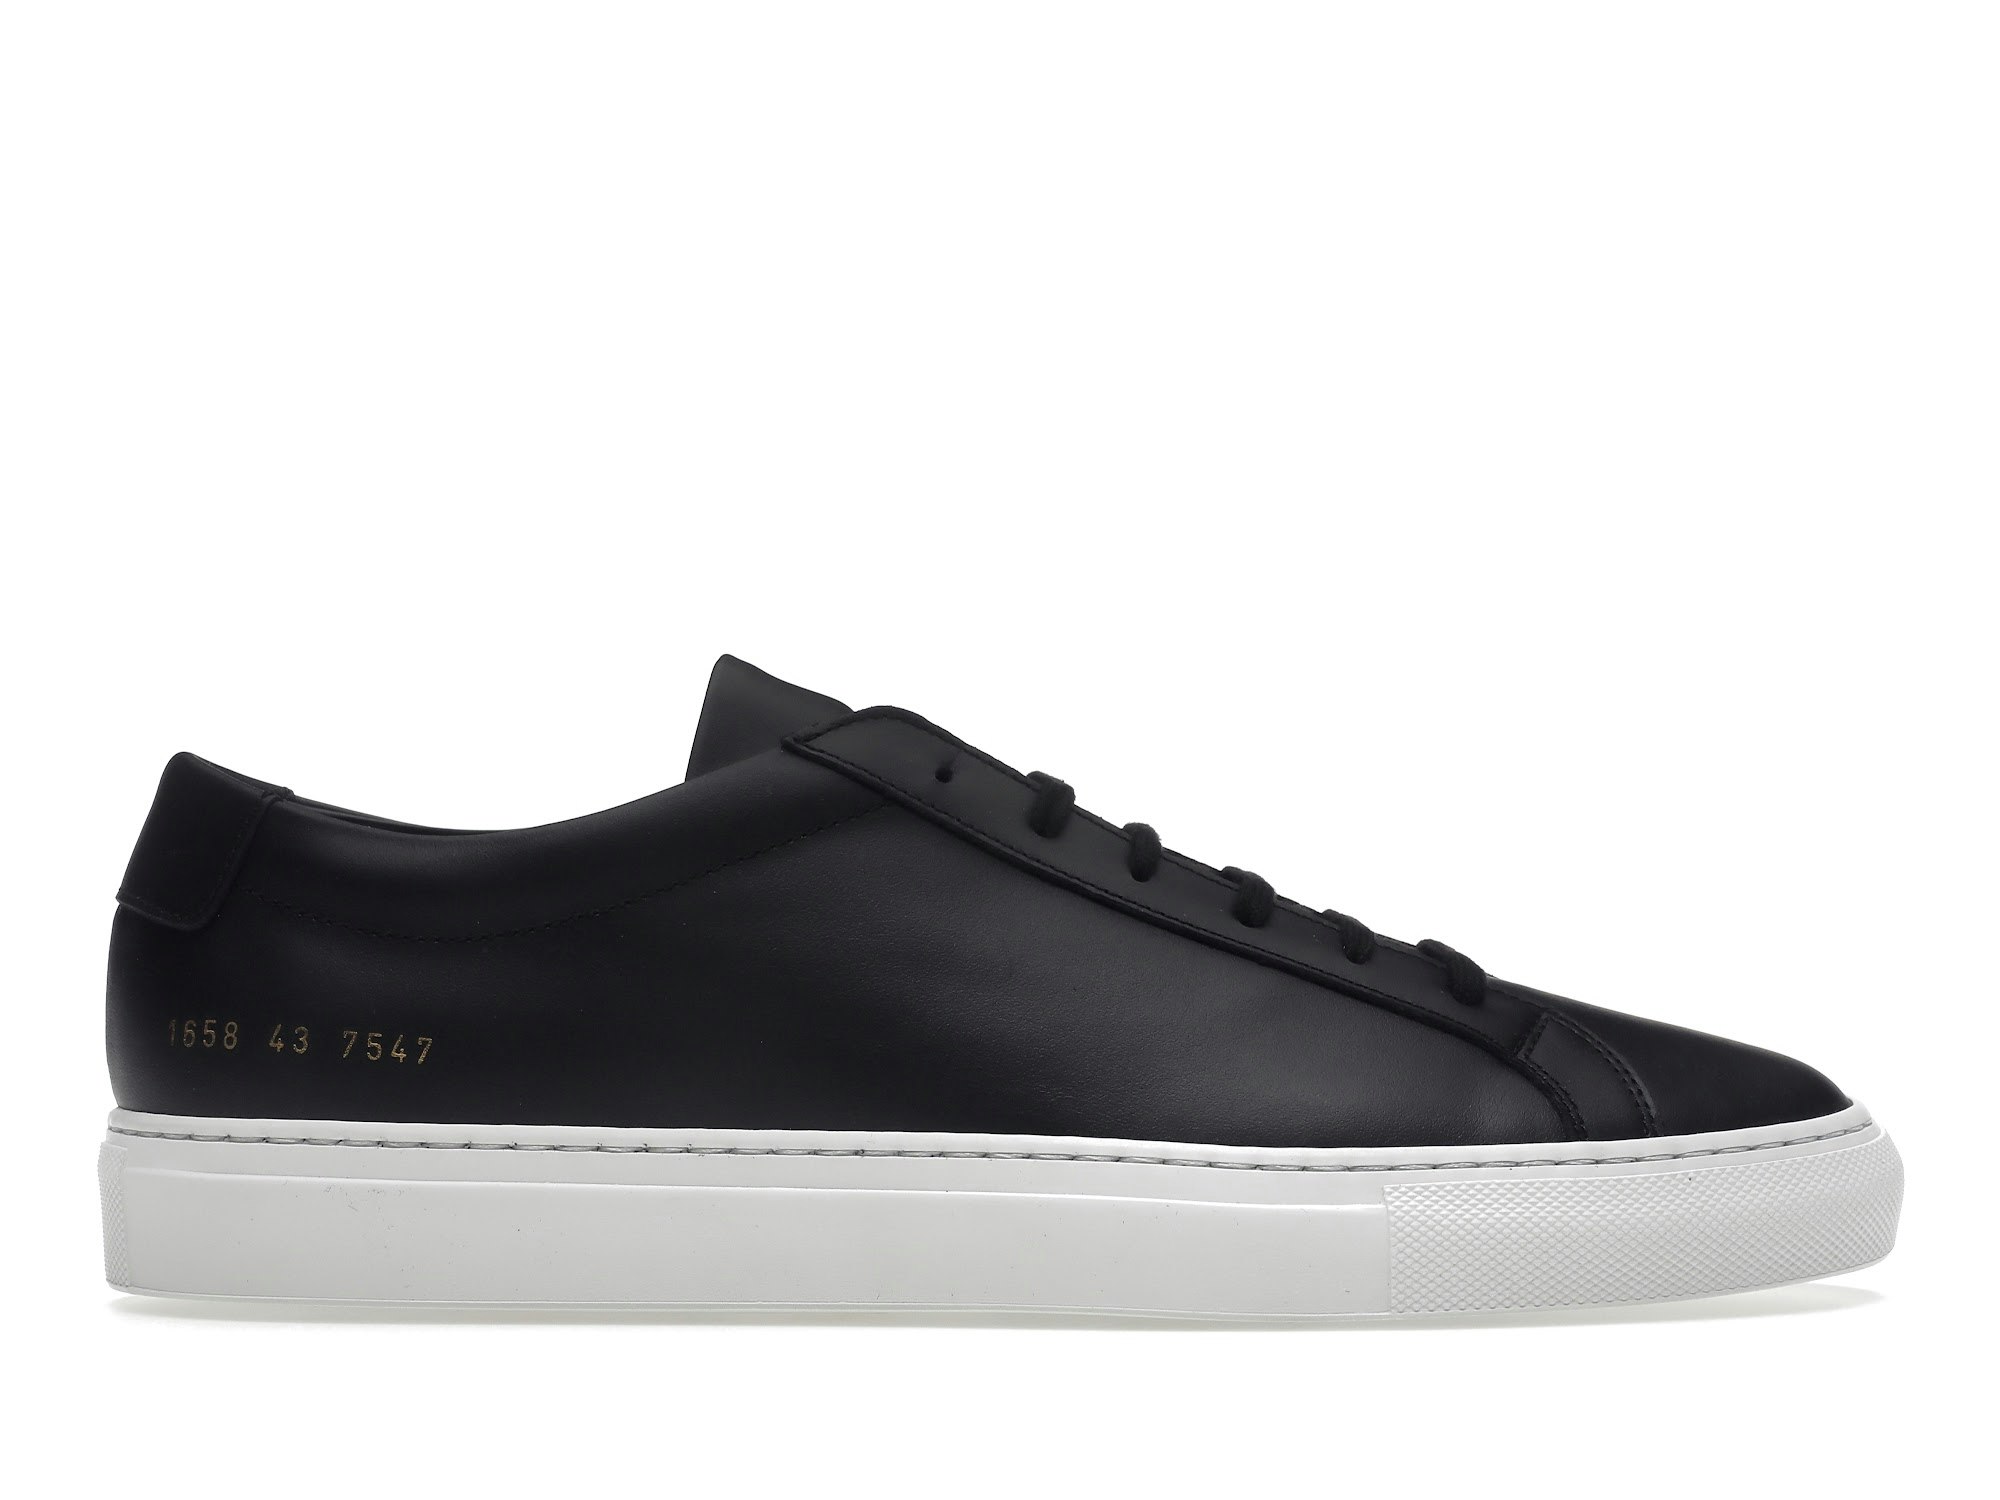 COMMON PROJECTS Original Achilles Leather Sneakers | Endource